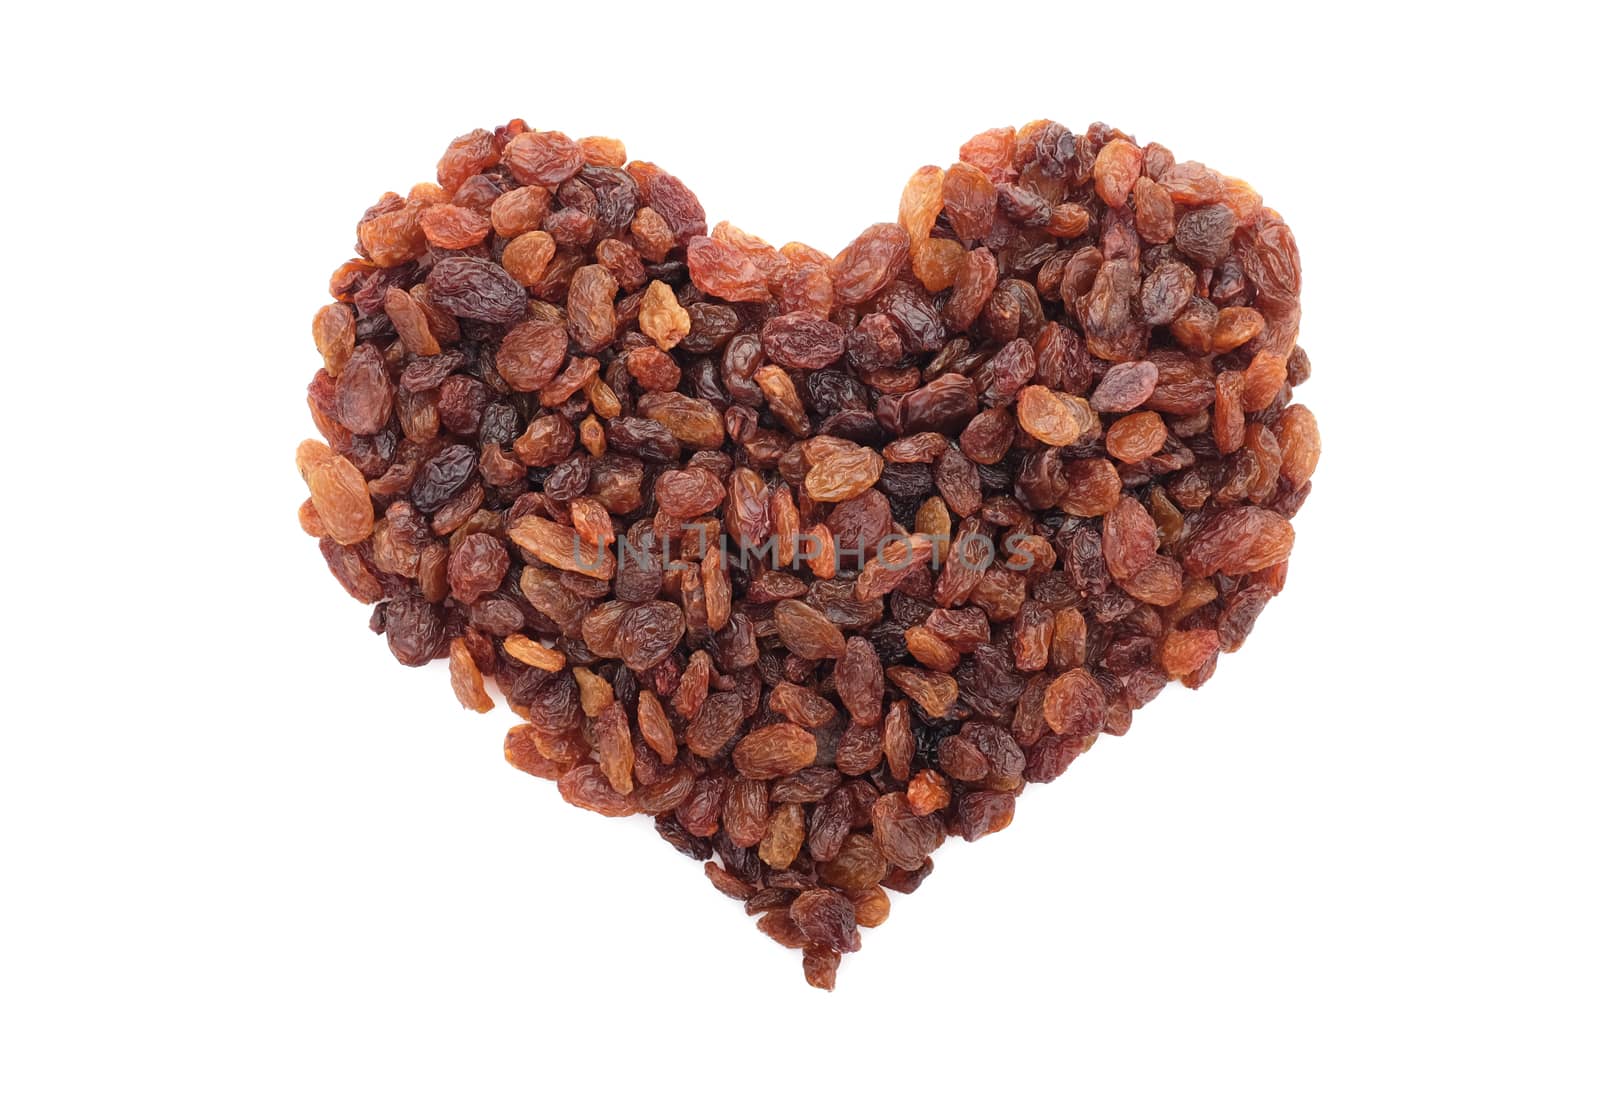 Sultanas in a heart shape by sarahdoow